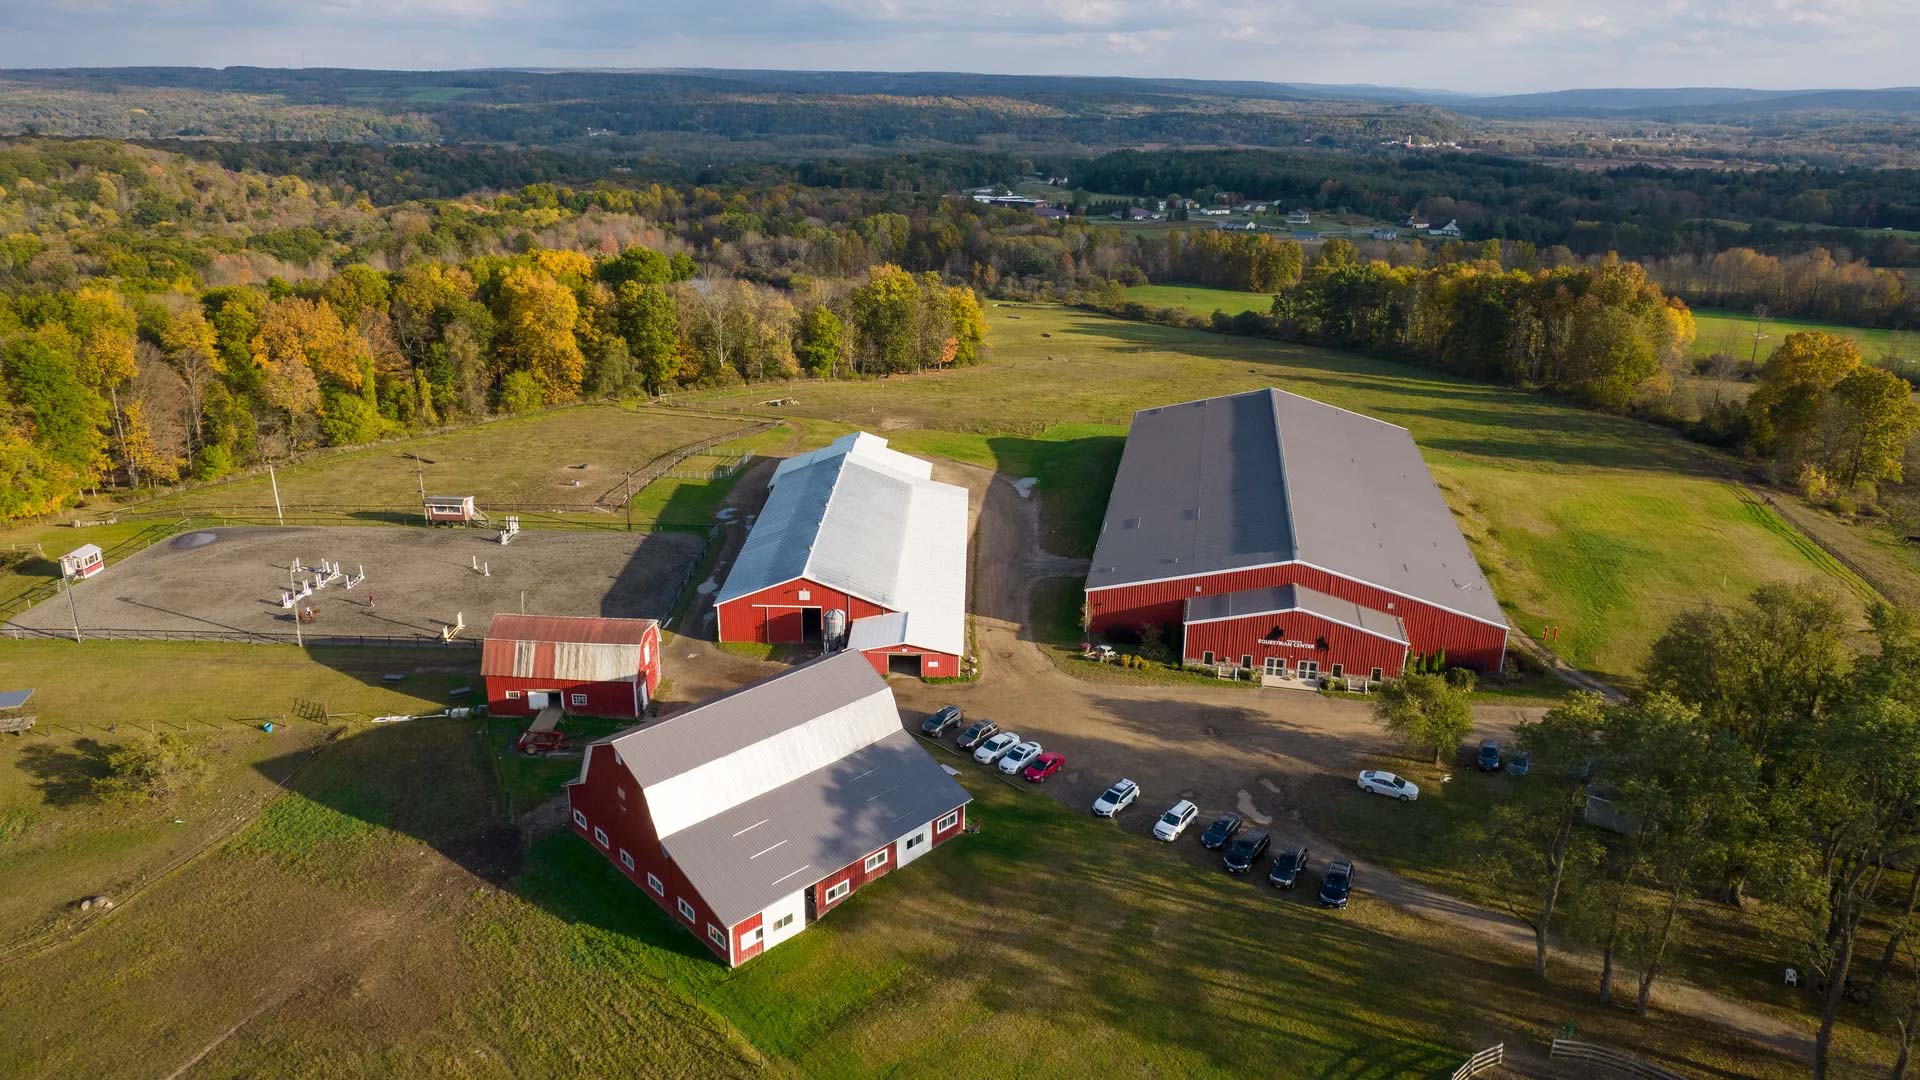 Aerial view of Houghton University's equestrian center.